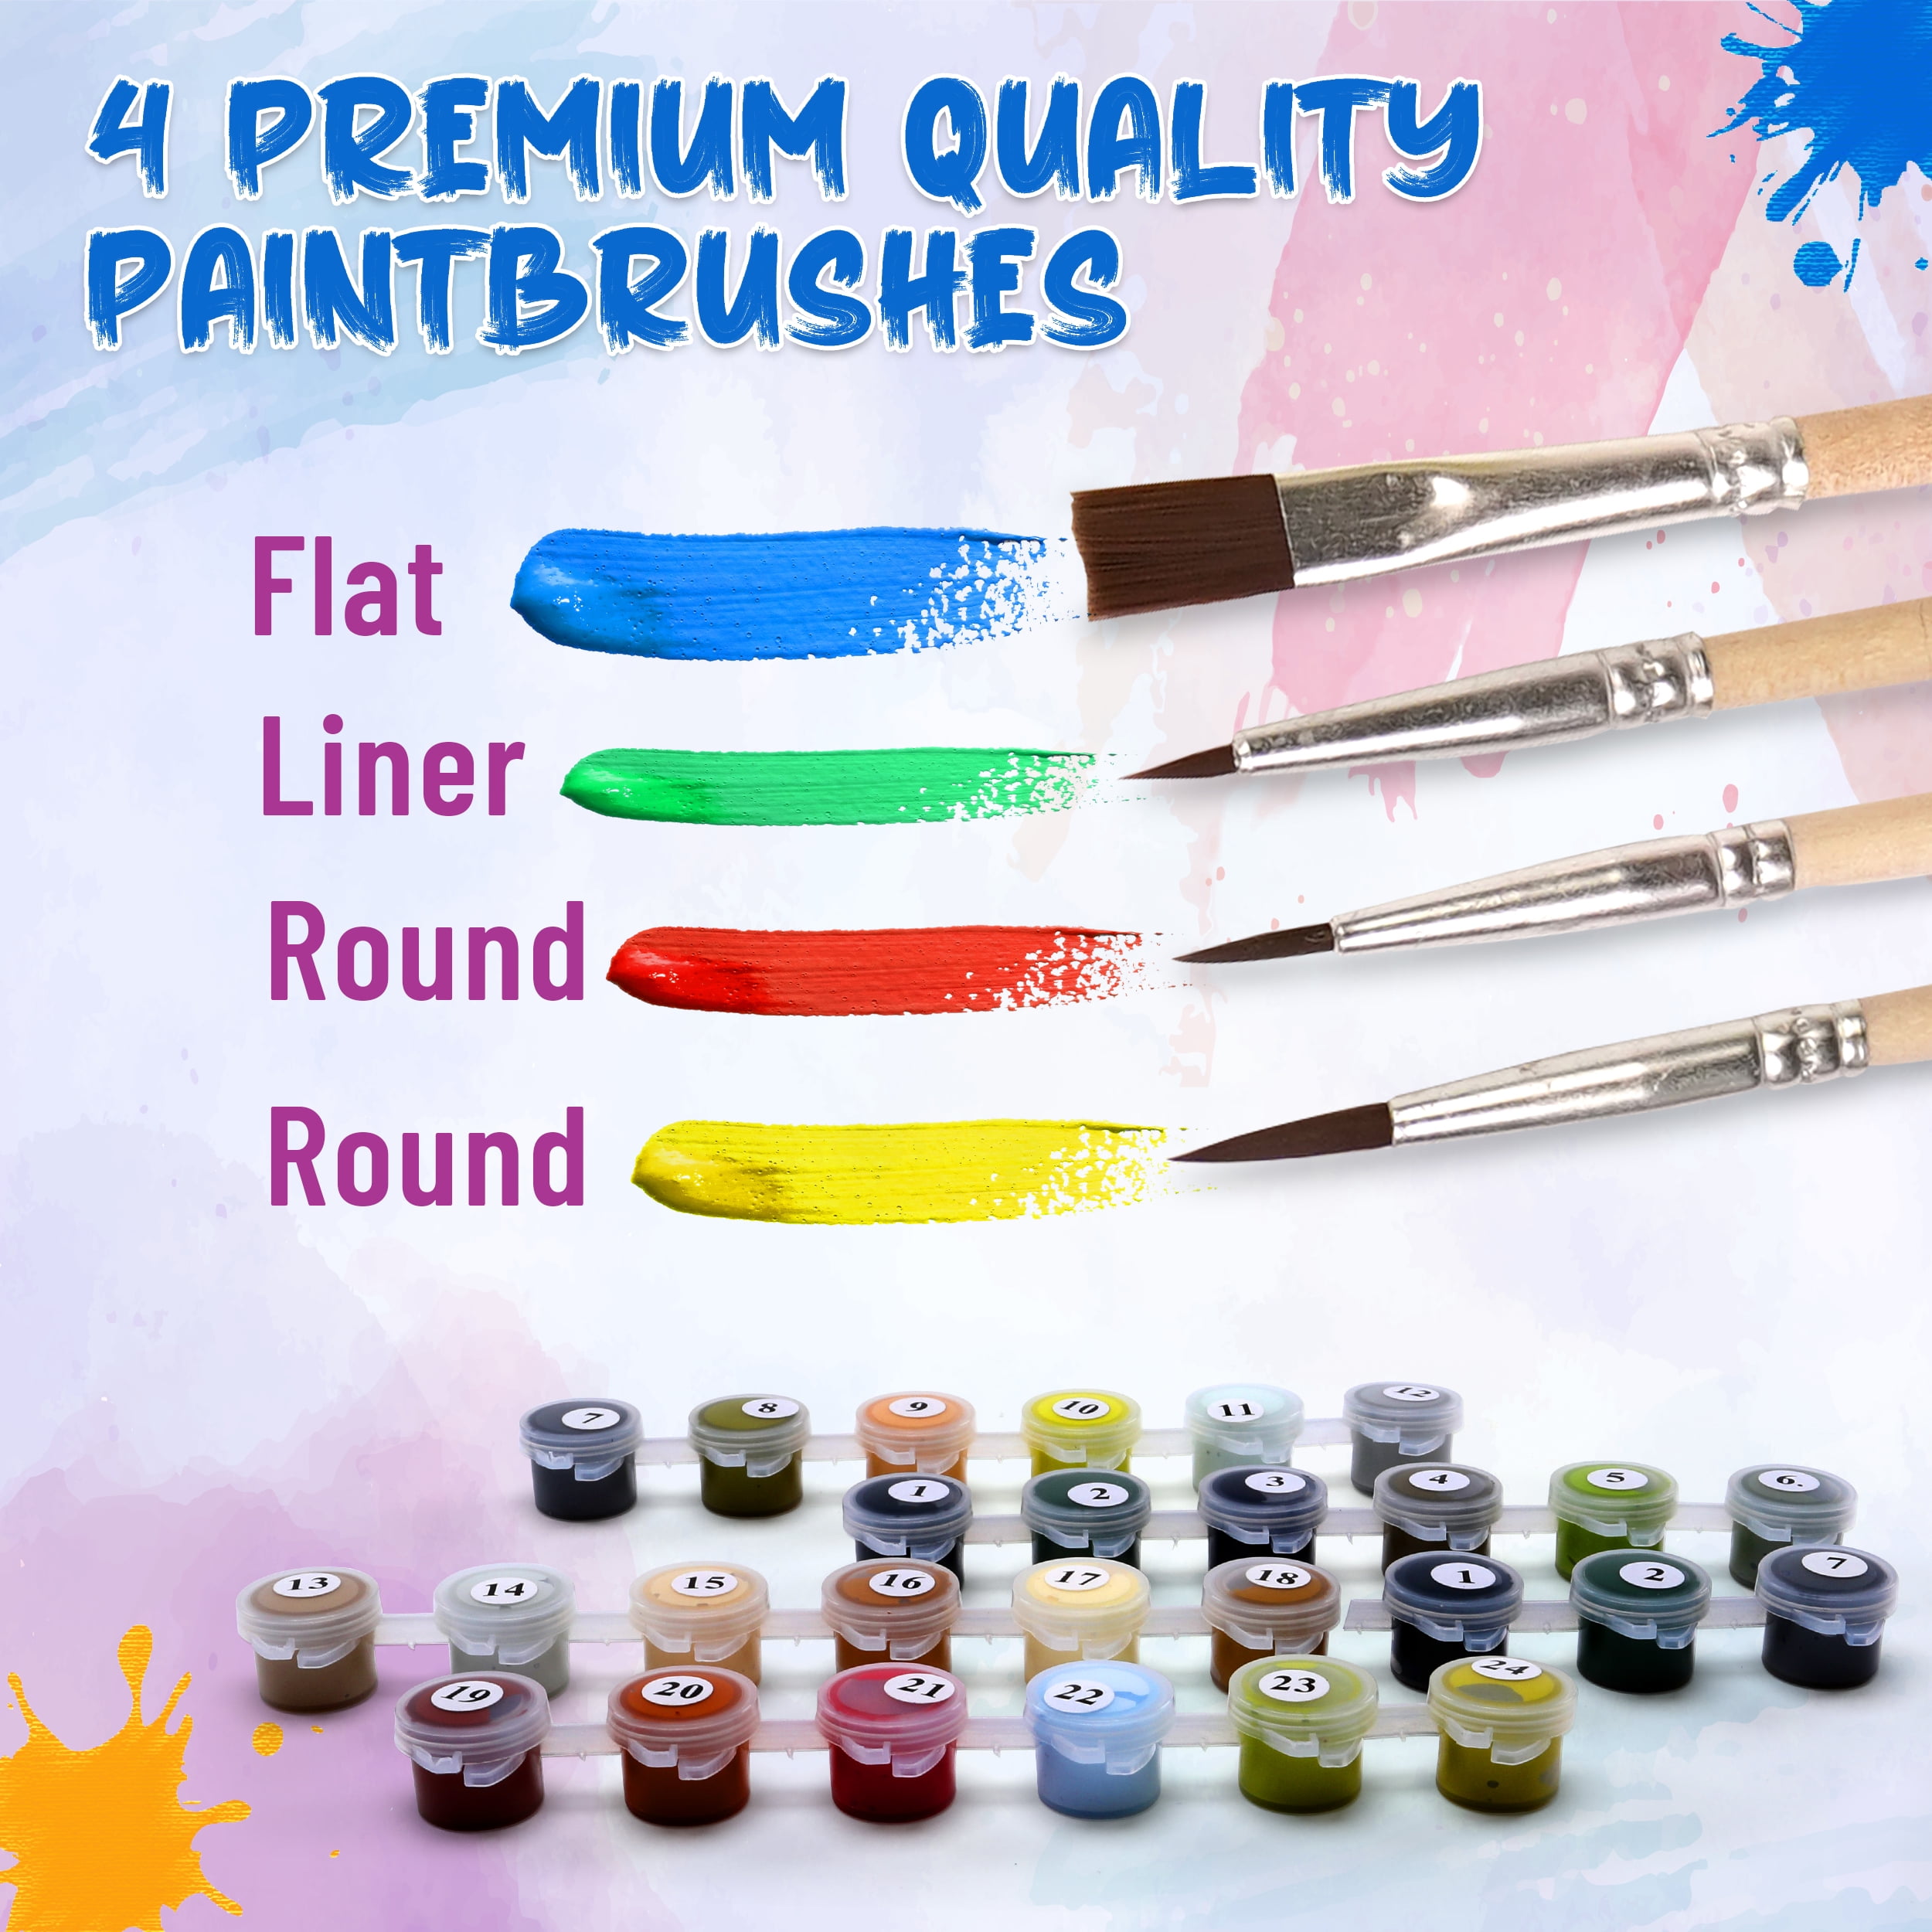 Ledg Paint by Numbers for Adults': Beginner to Advanced Number Painting Kit - Fun DIY Adult Arts & Crafts Projects - Kits Include Acrylic Paint 